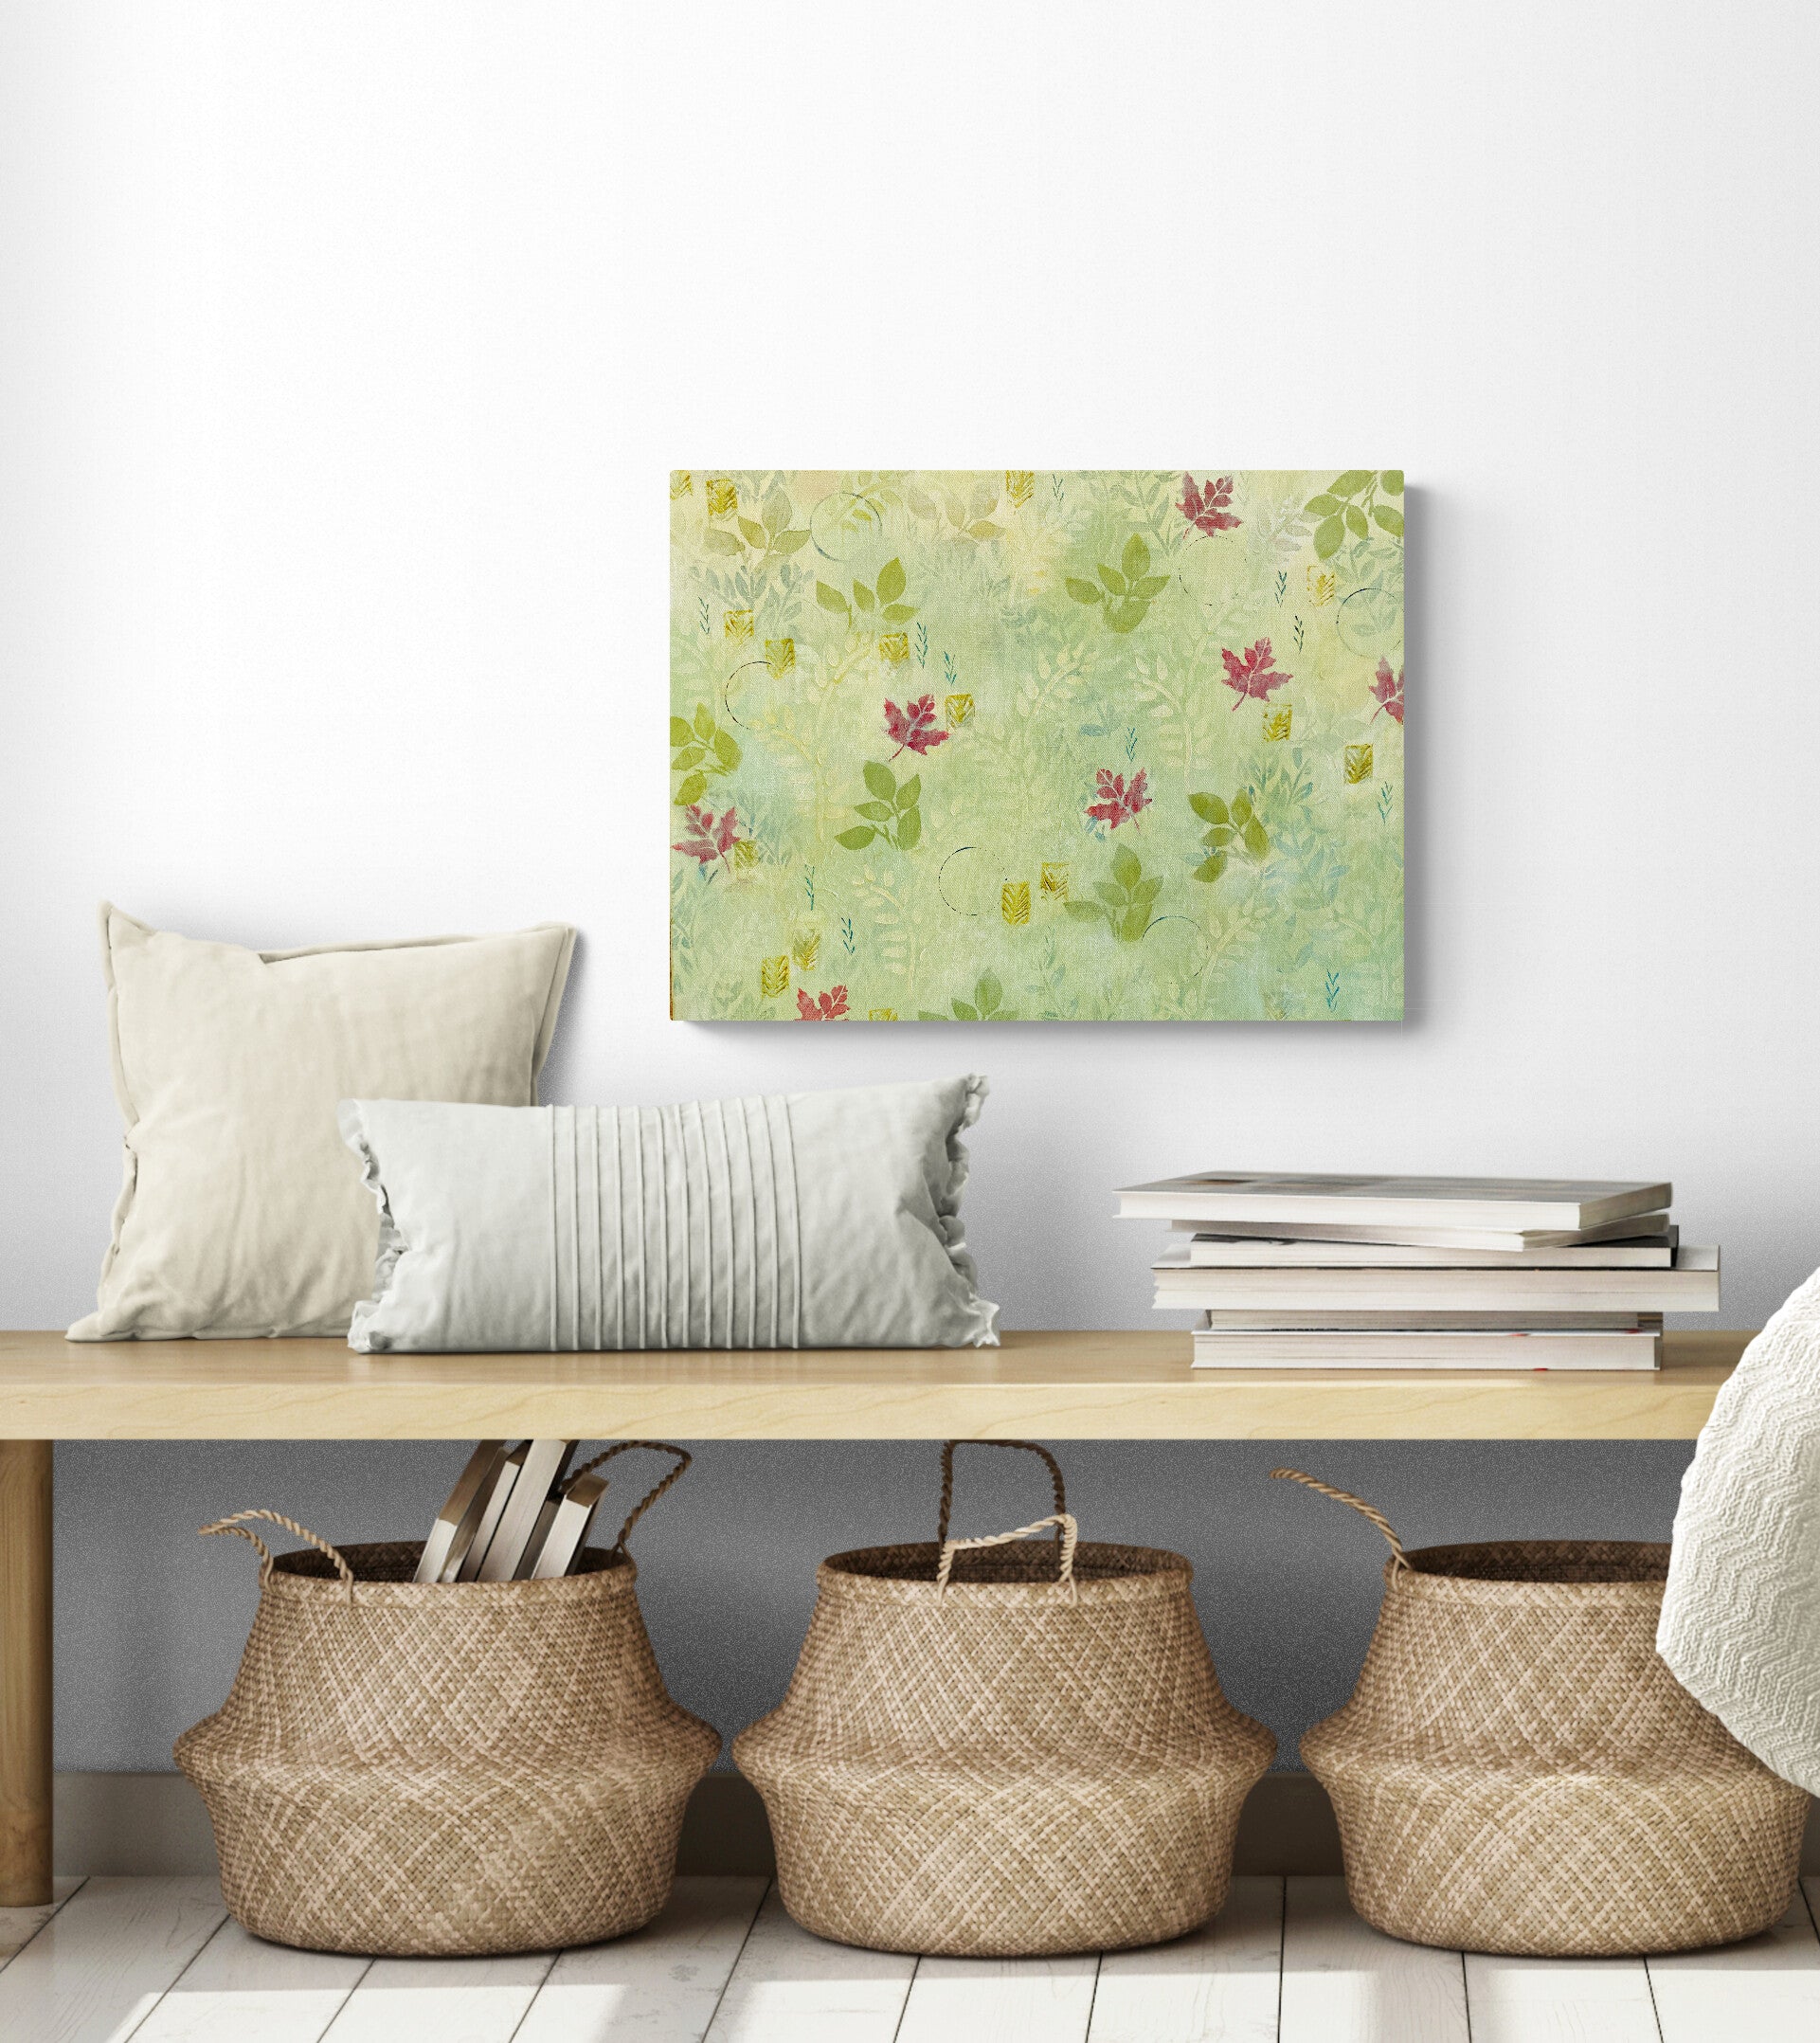 acrylic painting with light green background and leaves red maple leaves abstract pattern bright and cheerful shown in room with bench and baskets below